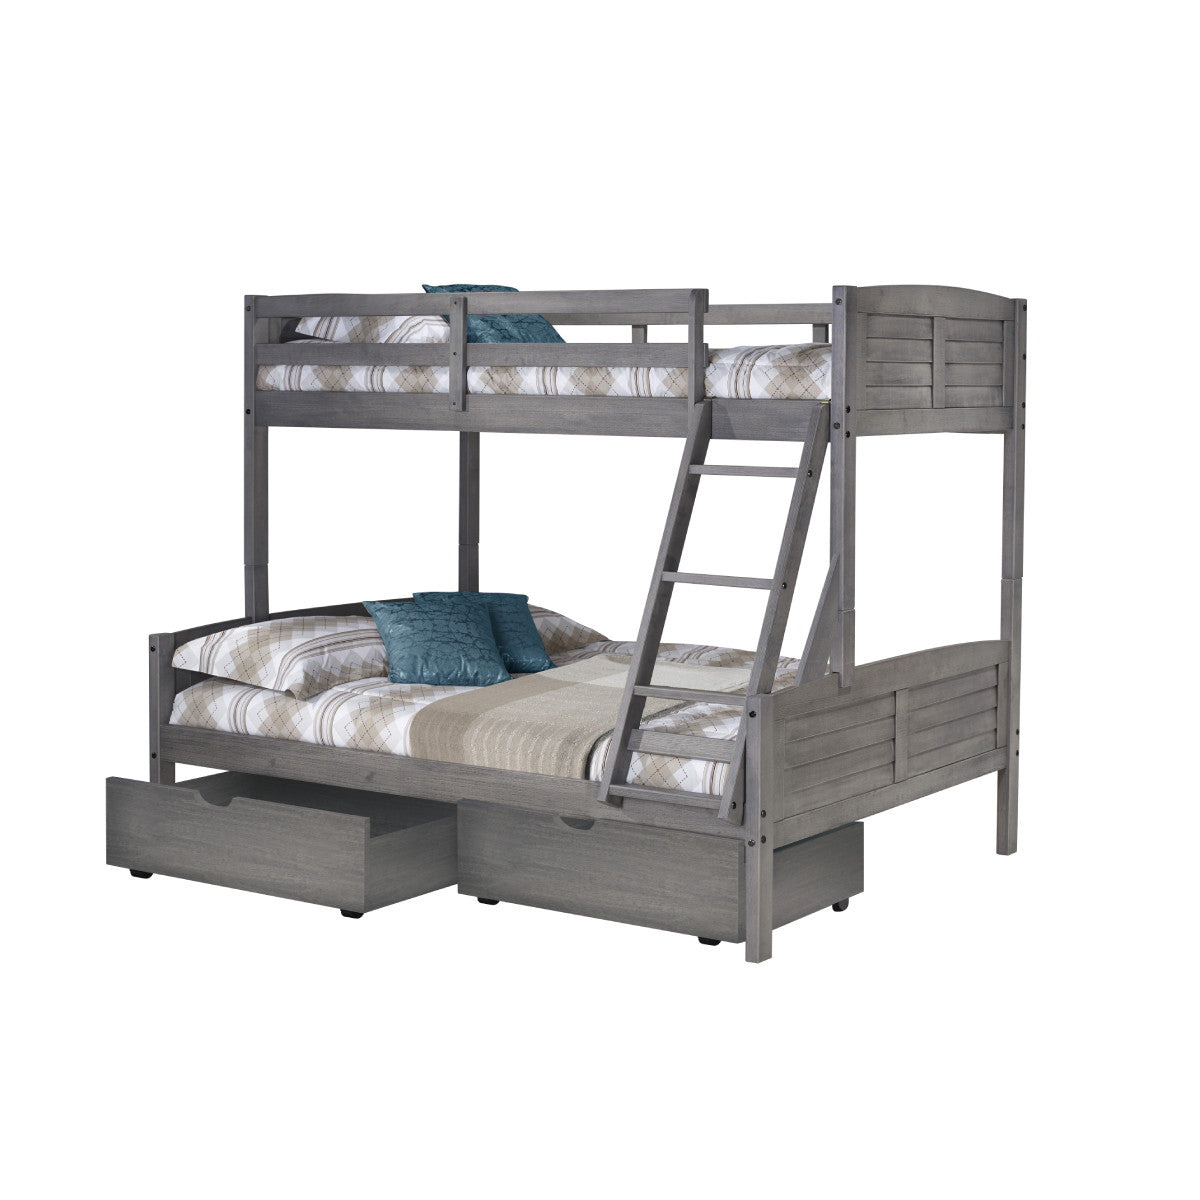 TWIN/FULL LOUVER BUNK BED WITH DUAL UNDER BED DRAWERS IN ANTIQUE GREY FINISH